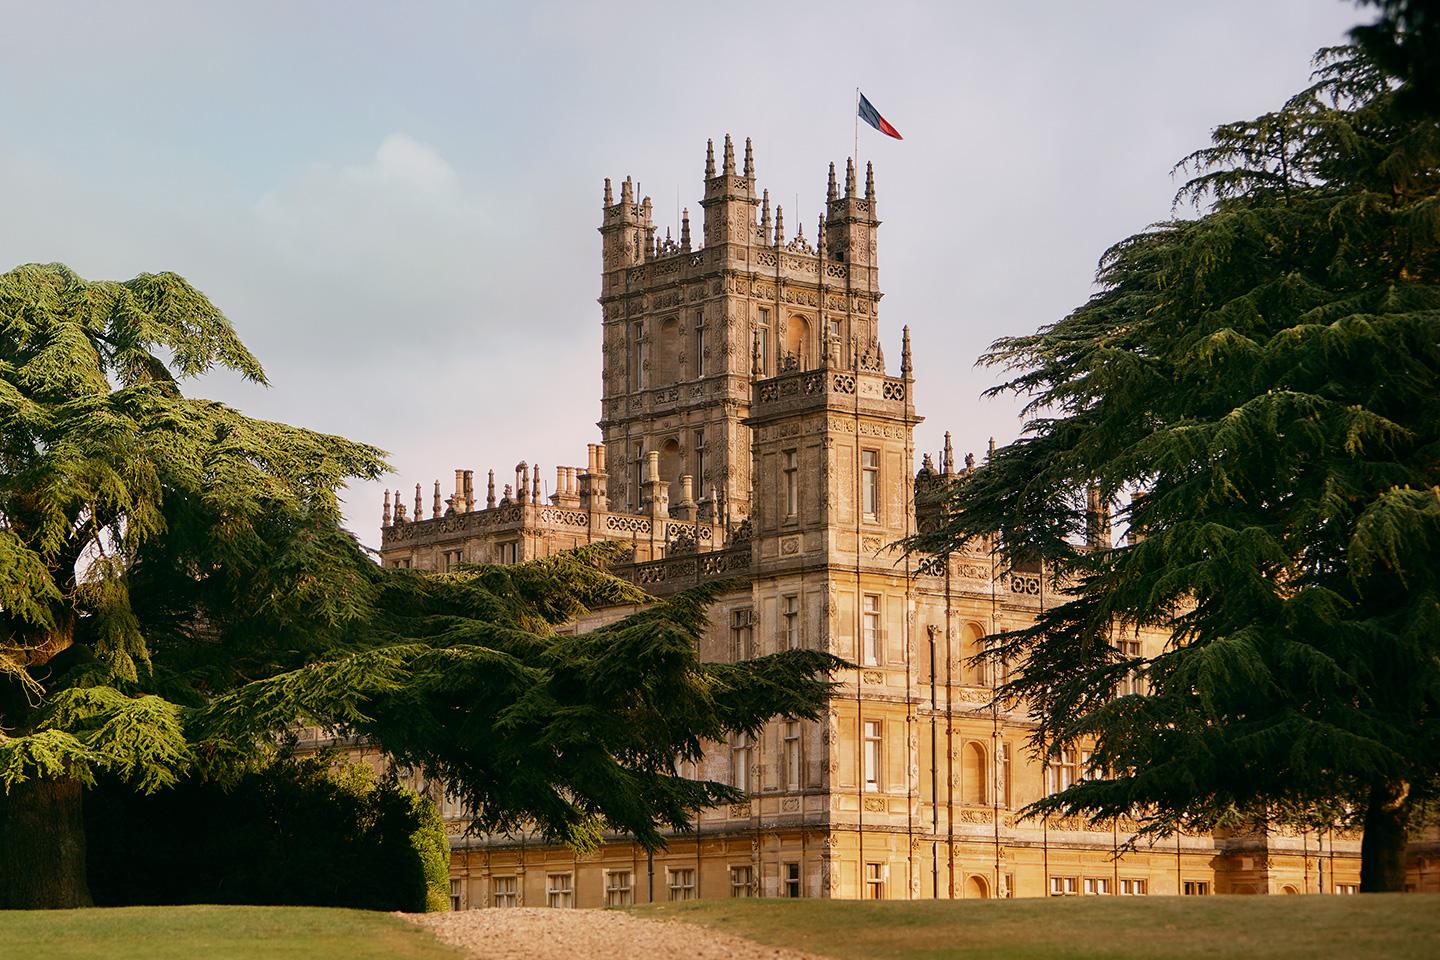 - To celebrate the upcoming motion picture event Downton Abbey, Highclere Castle will open its doors to two guests for a never-before-stay available only on Airbnb 